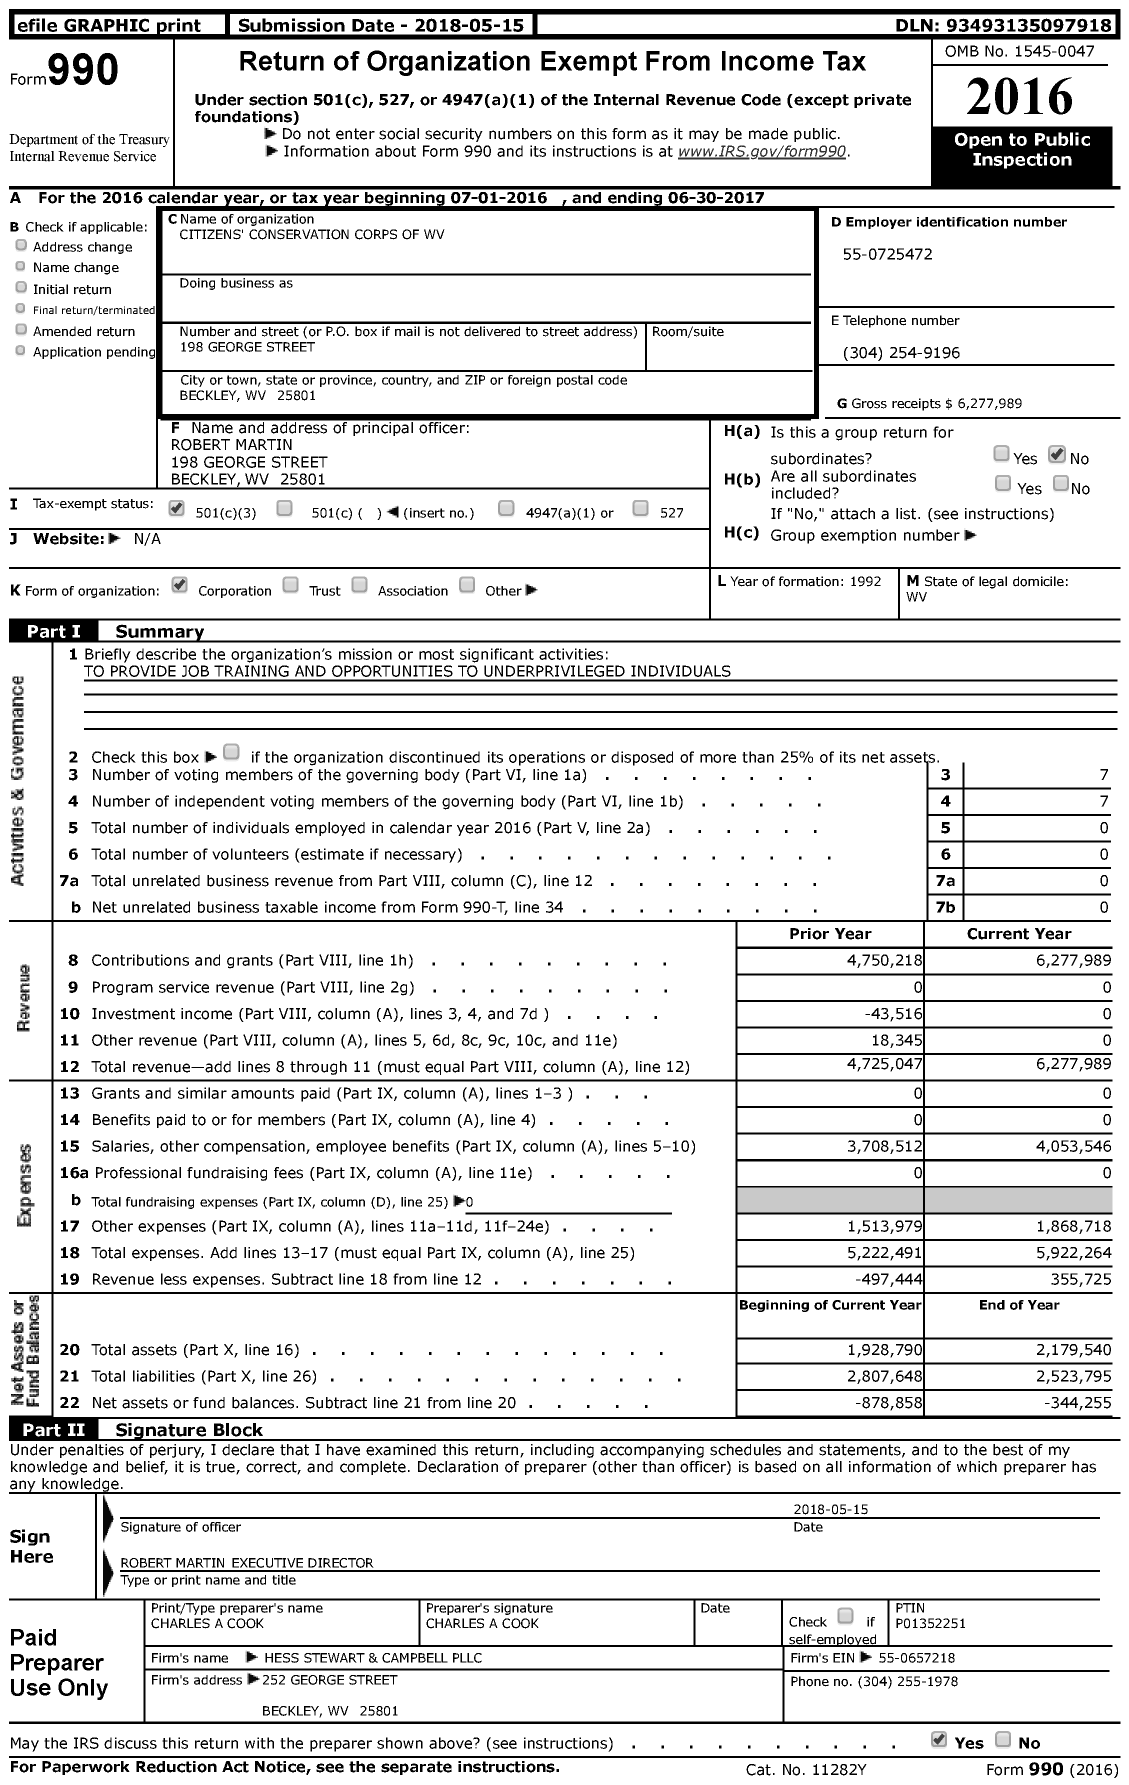 Image of first page of 2016 Form 990 for Citizens' Conservation Corps of WV